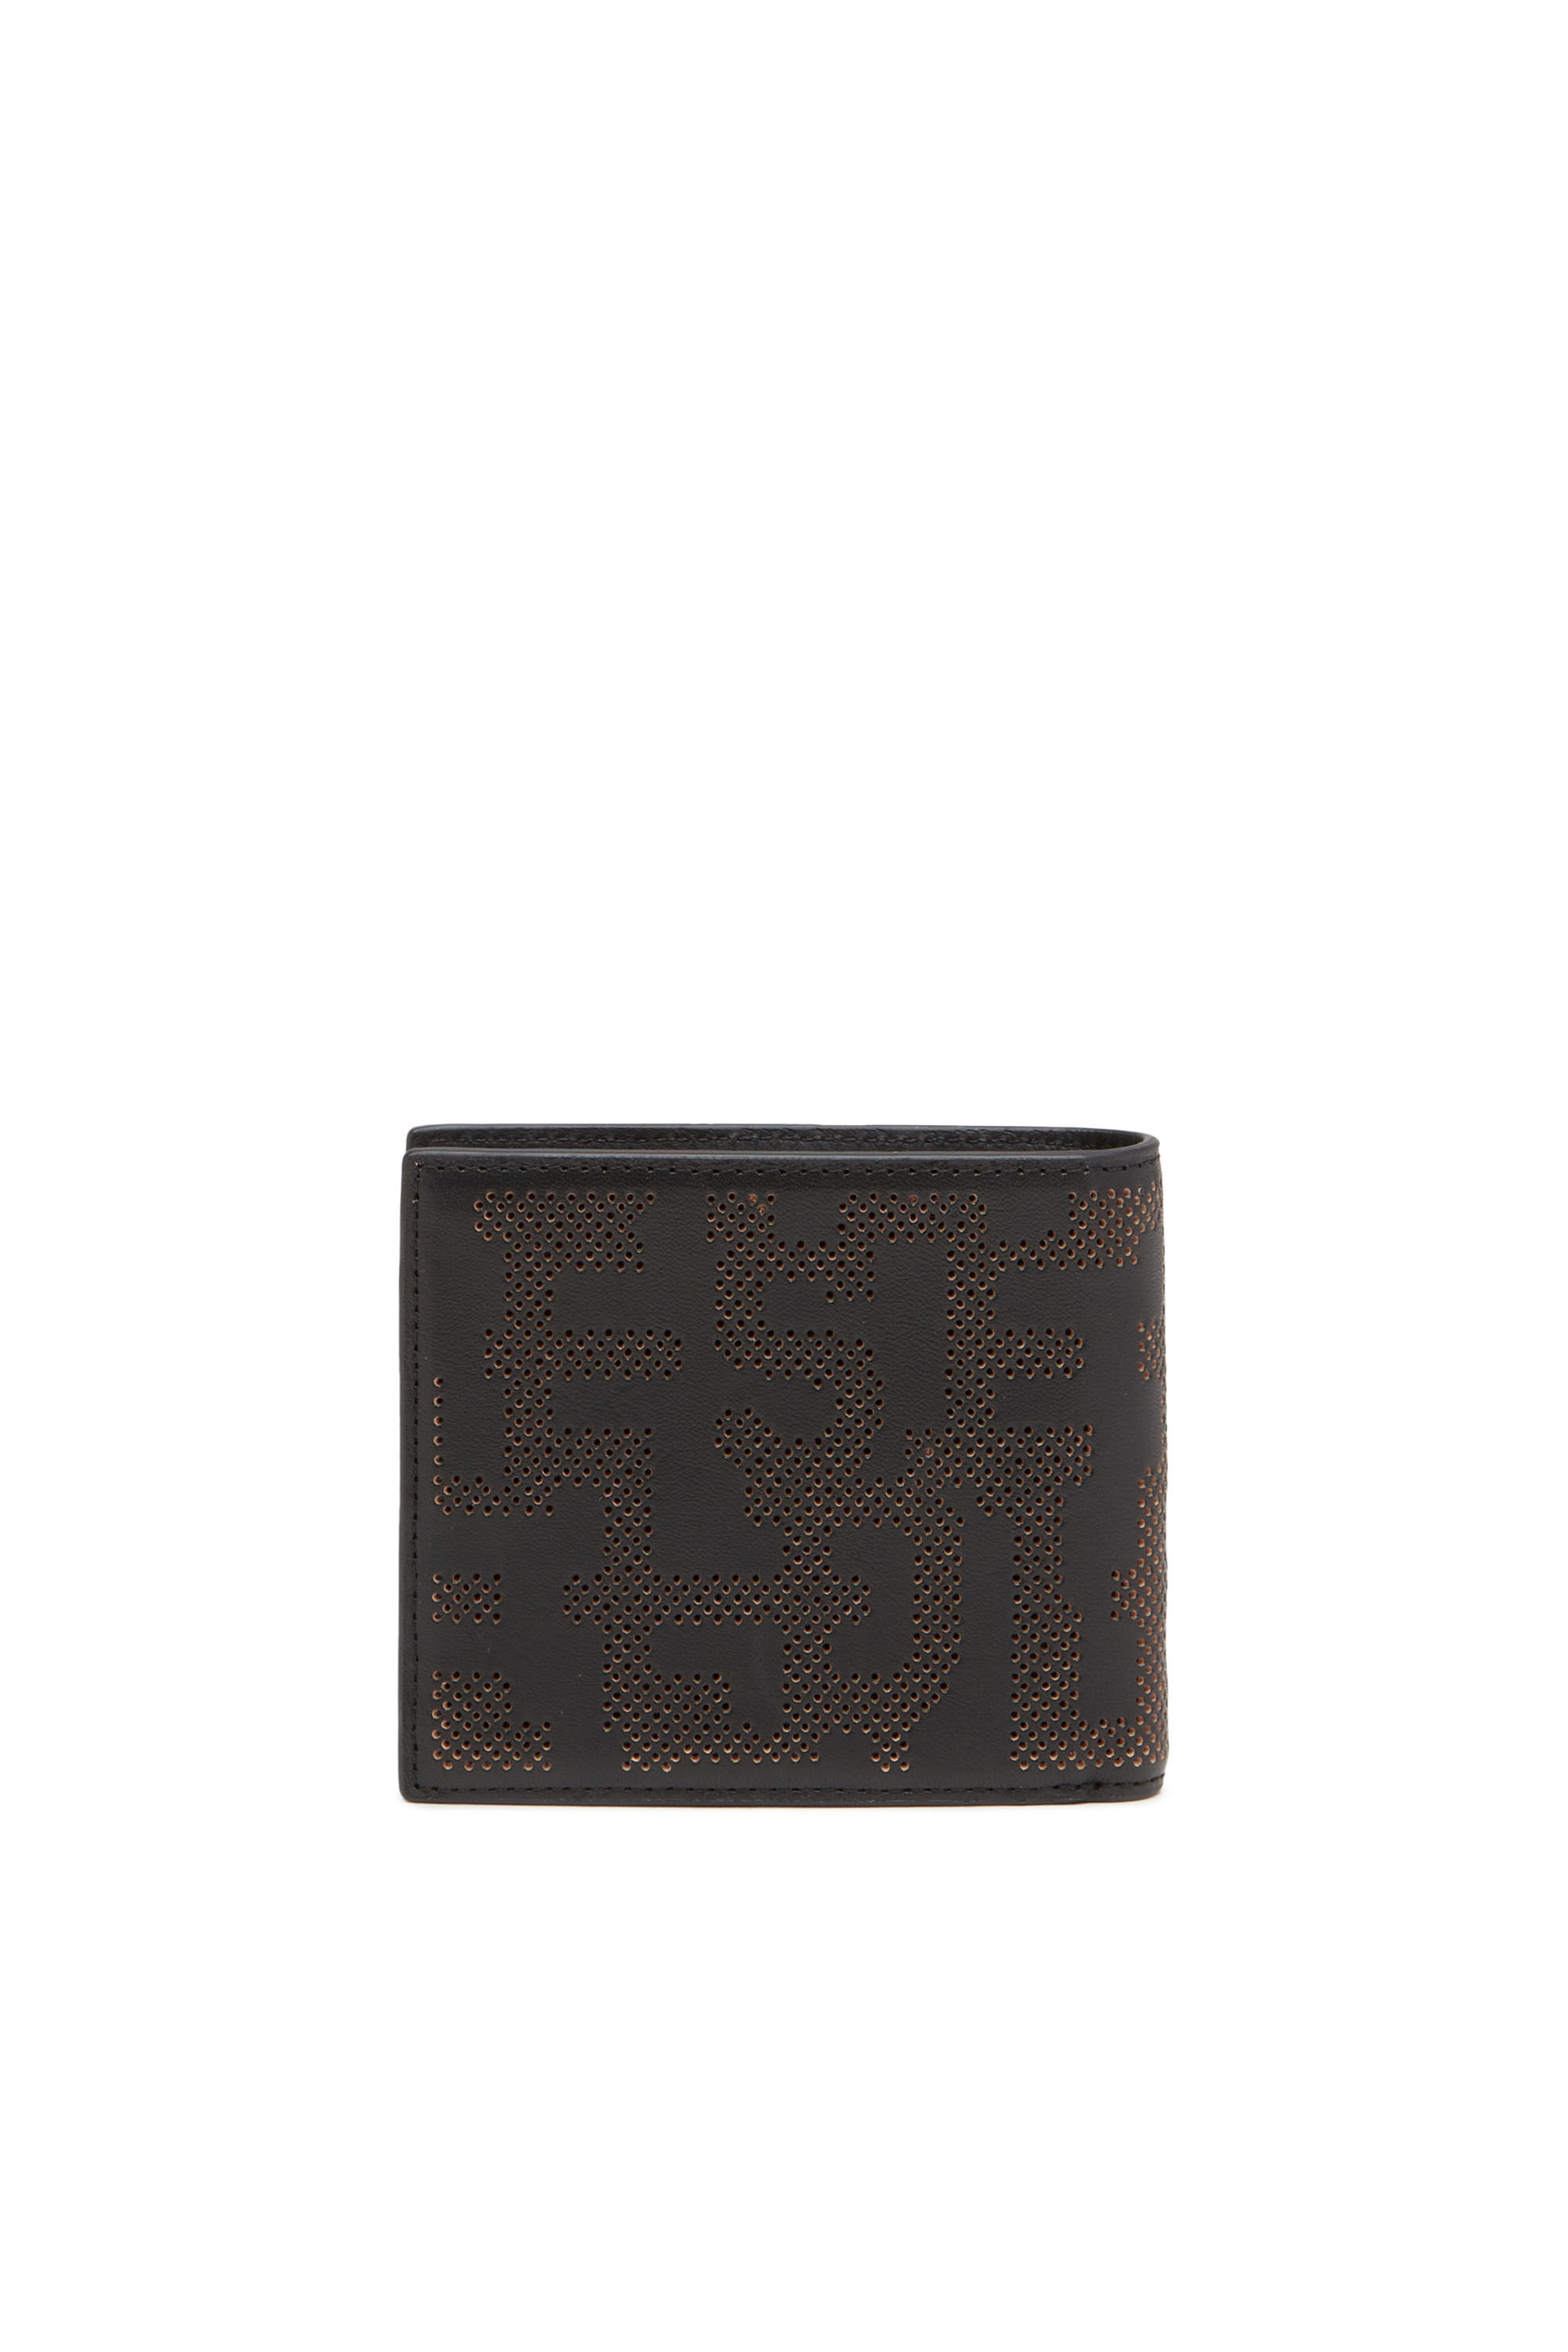 Women's Bi-fold wallet in perforated leather | BI-FOLD COIN